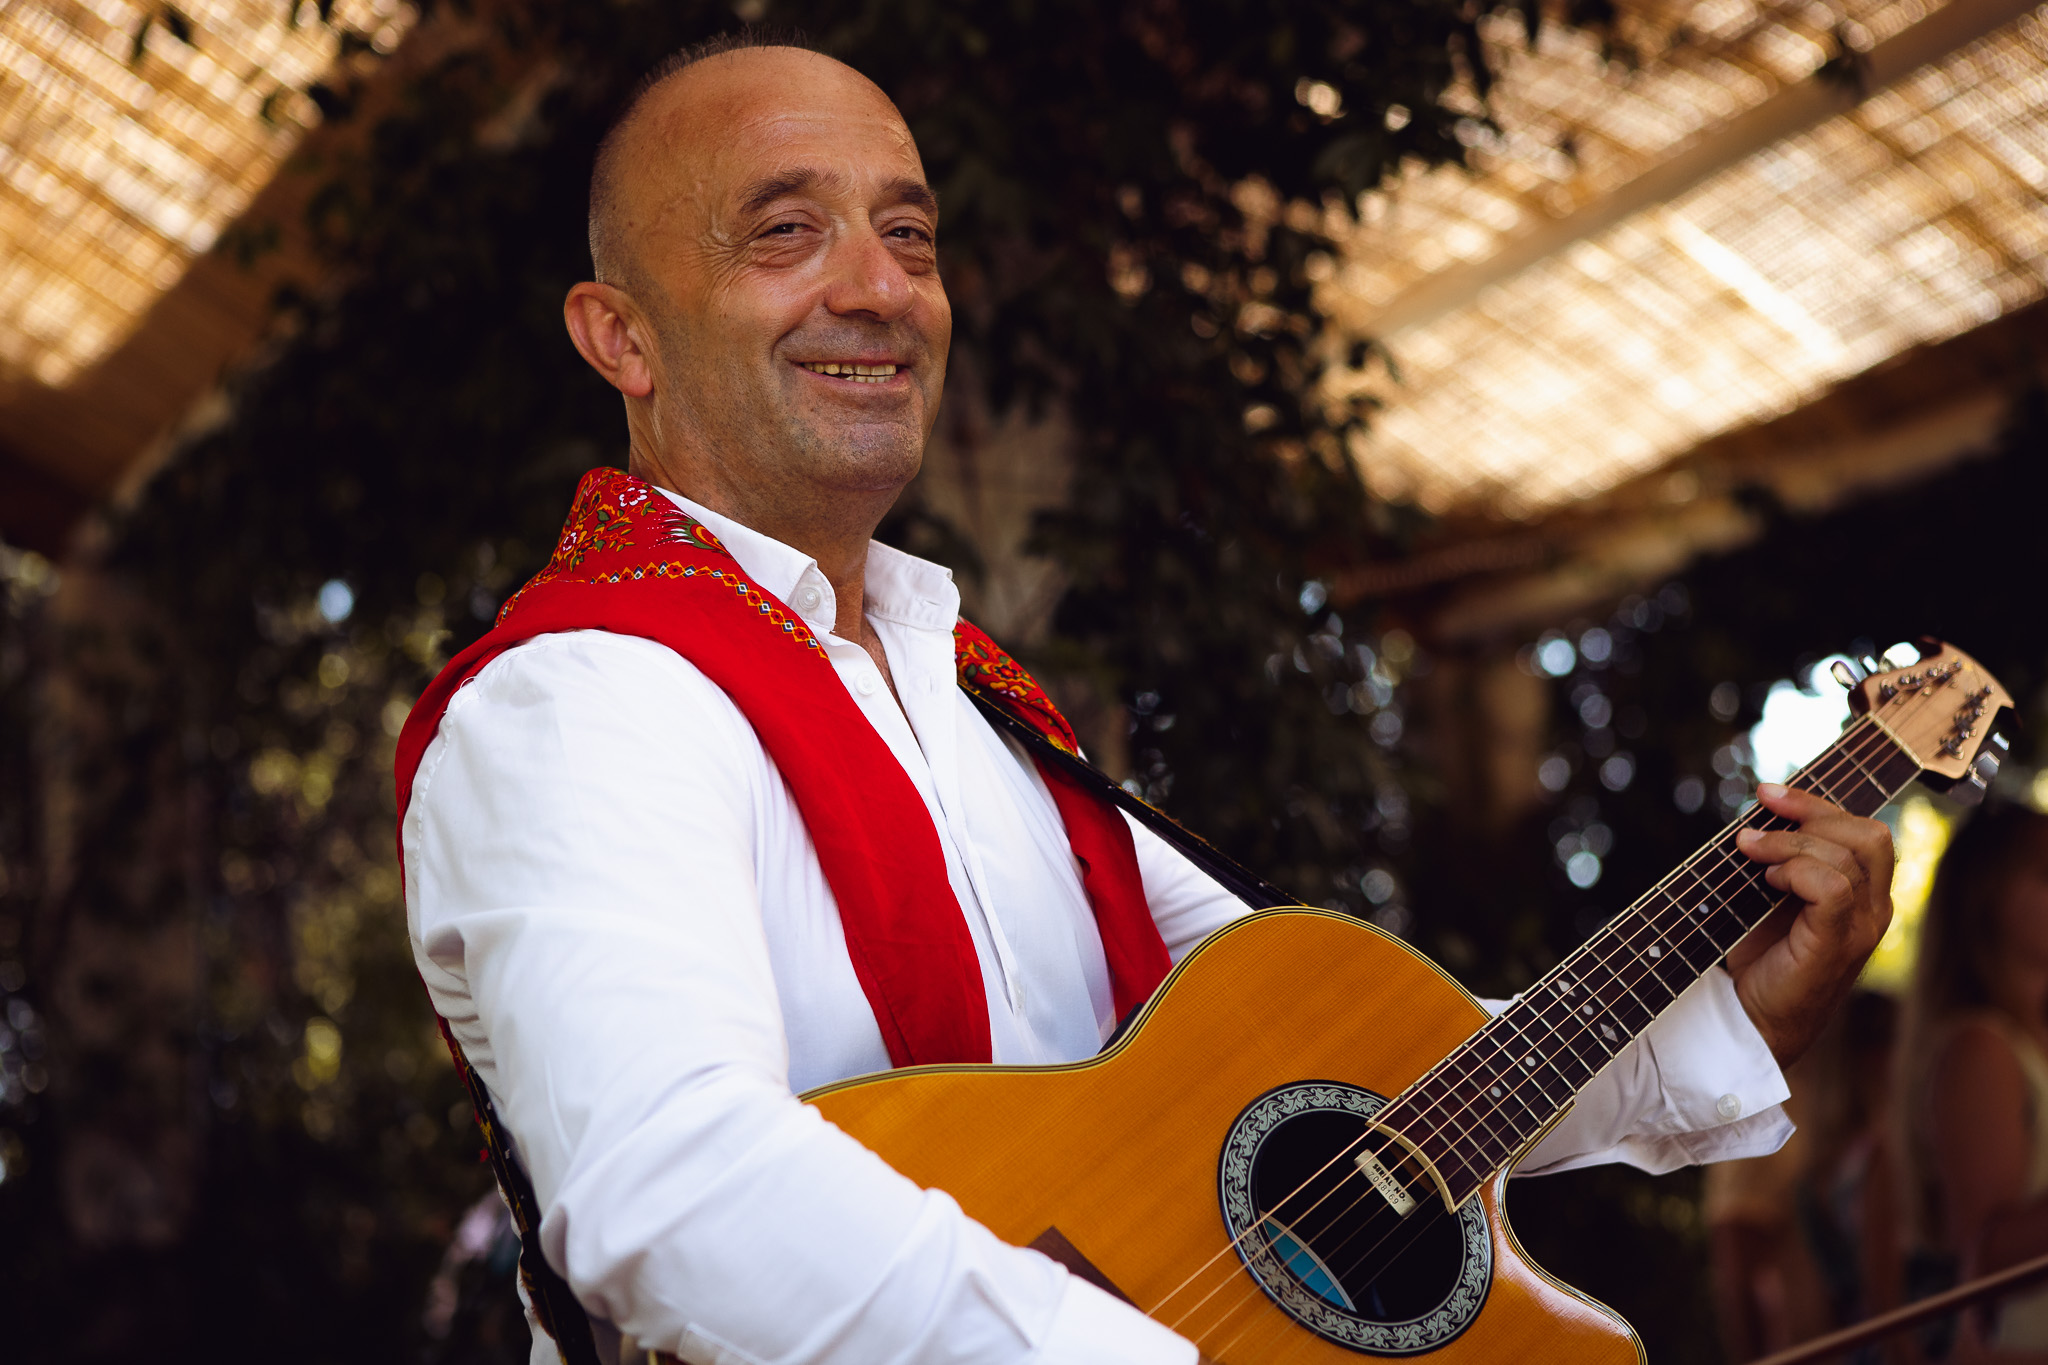 A guitarist from Alkinos Corfu Band smiles and plays at a wedding reception